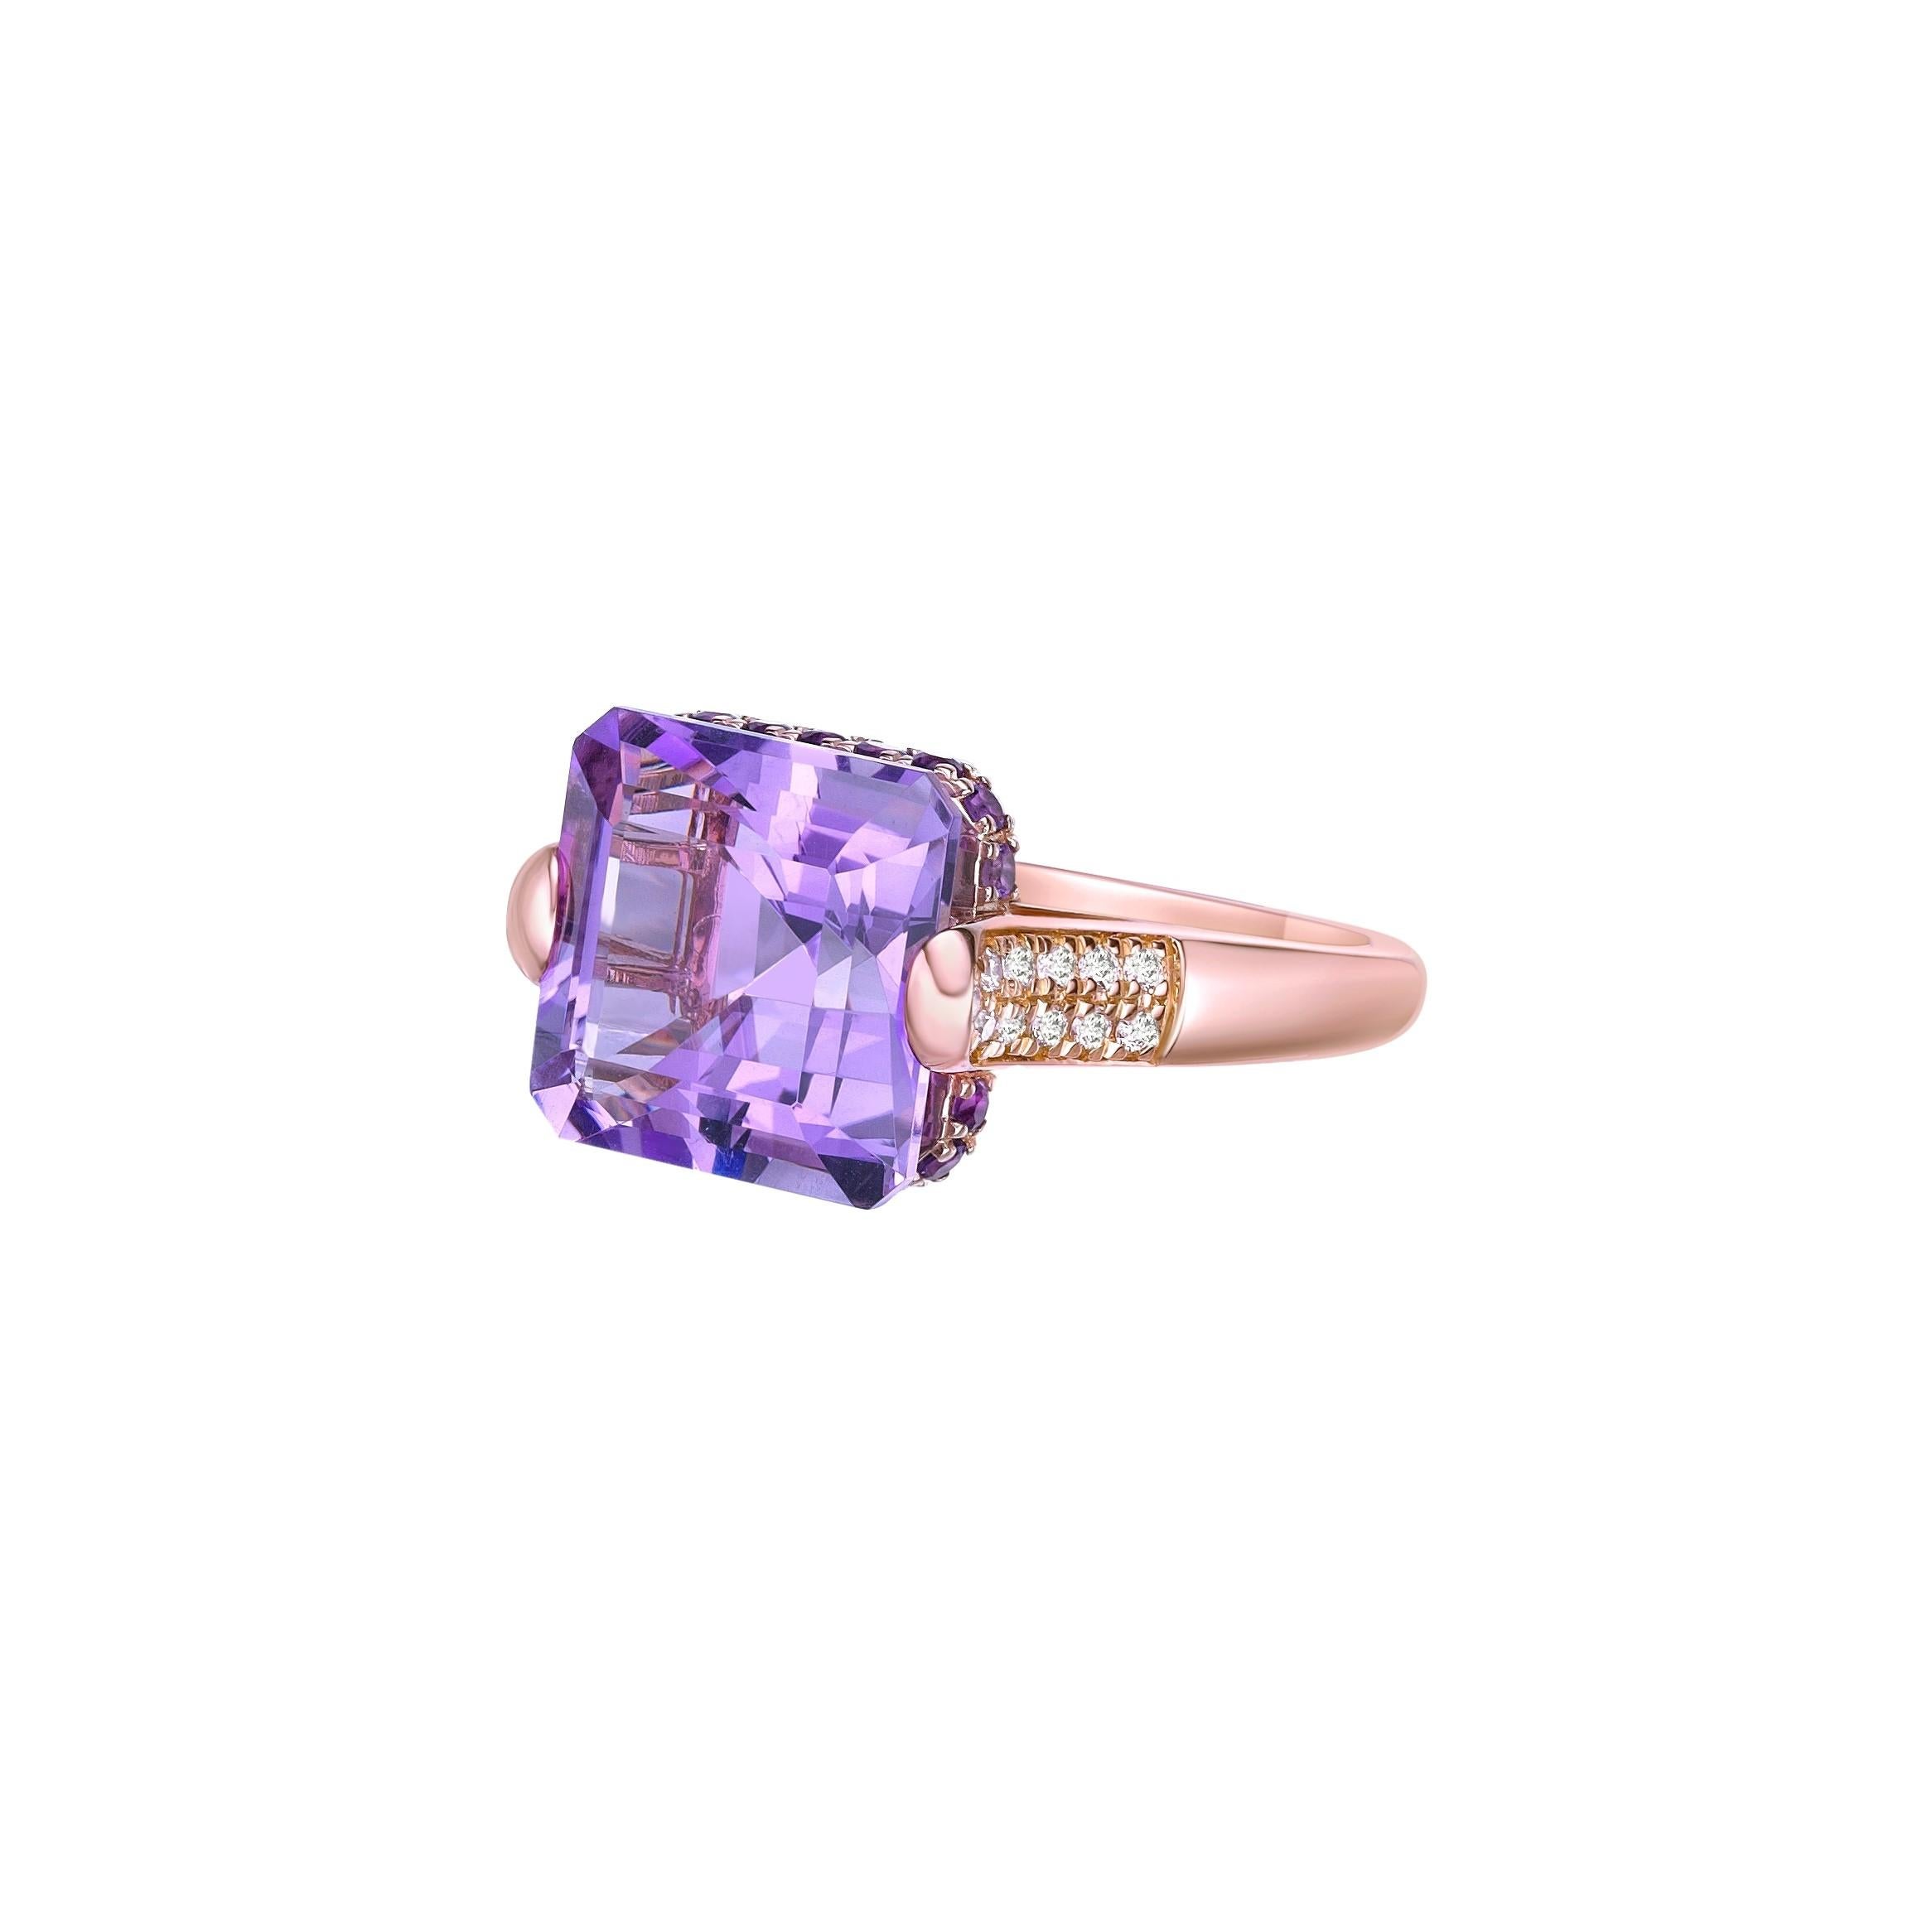 Octagon Cut 7.97 Carat Amethyst Fancy Ring in 18Karat Rose Gold with White Diamond. For Sale